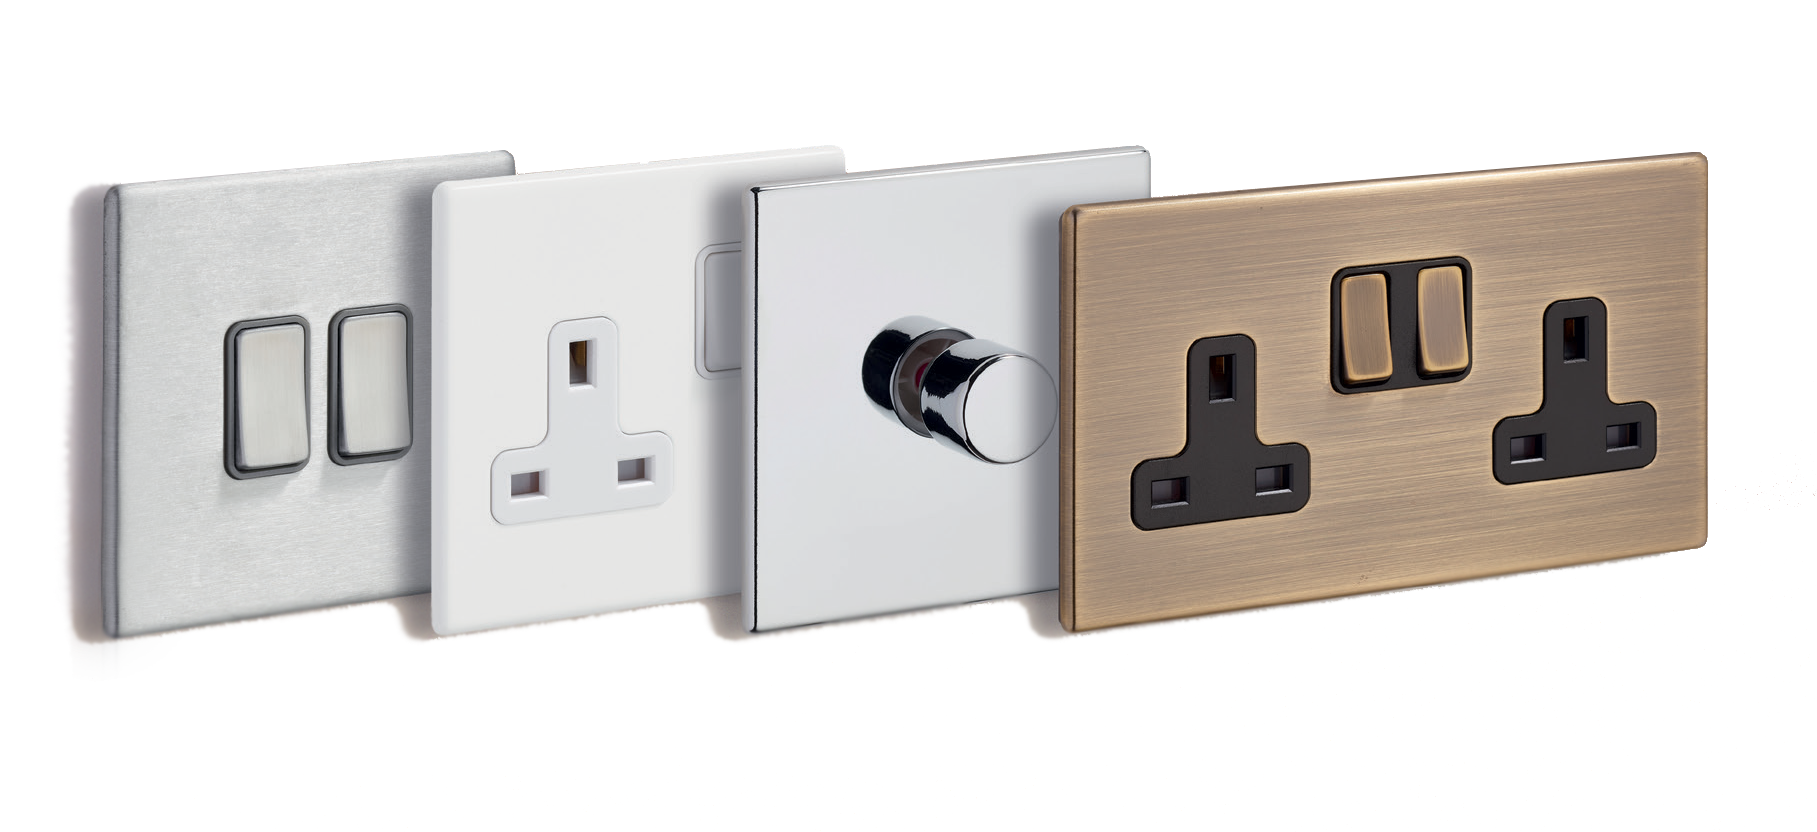 Range of different colours and finishes of switches and sockets